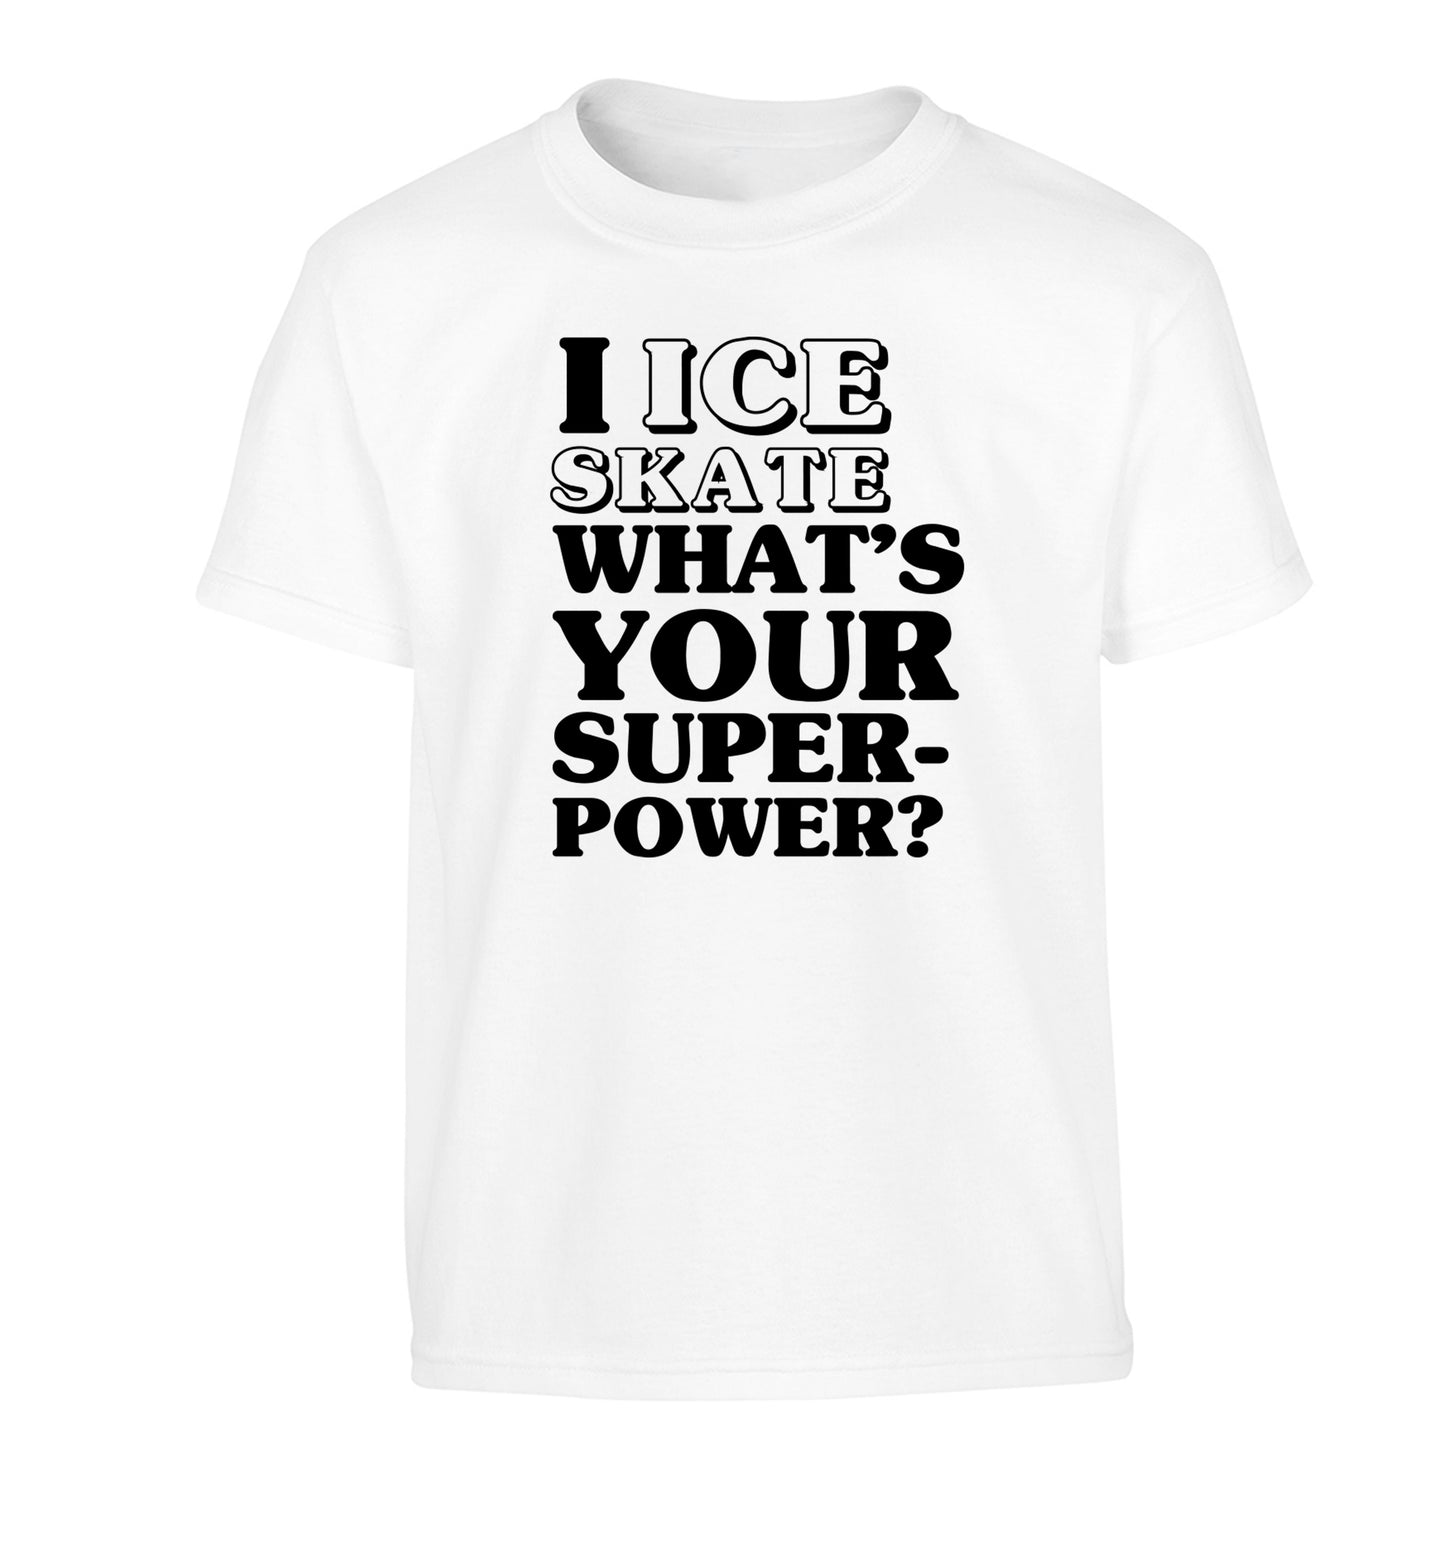 I ice skate what's your superpower? Children's white Tshirt 12-14 Years